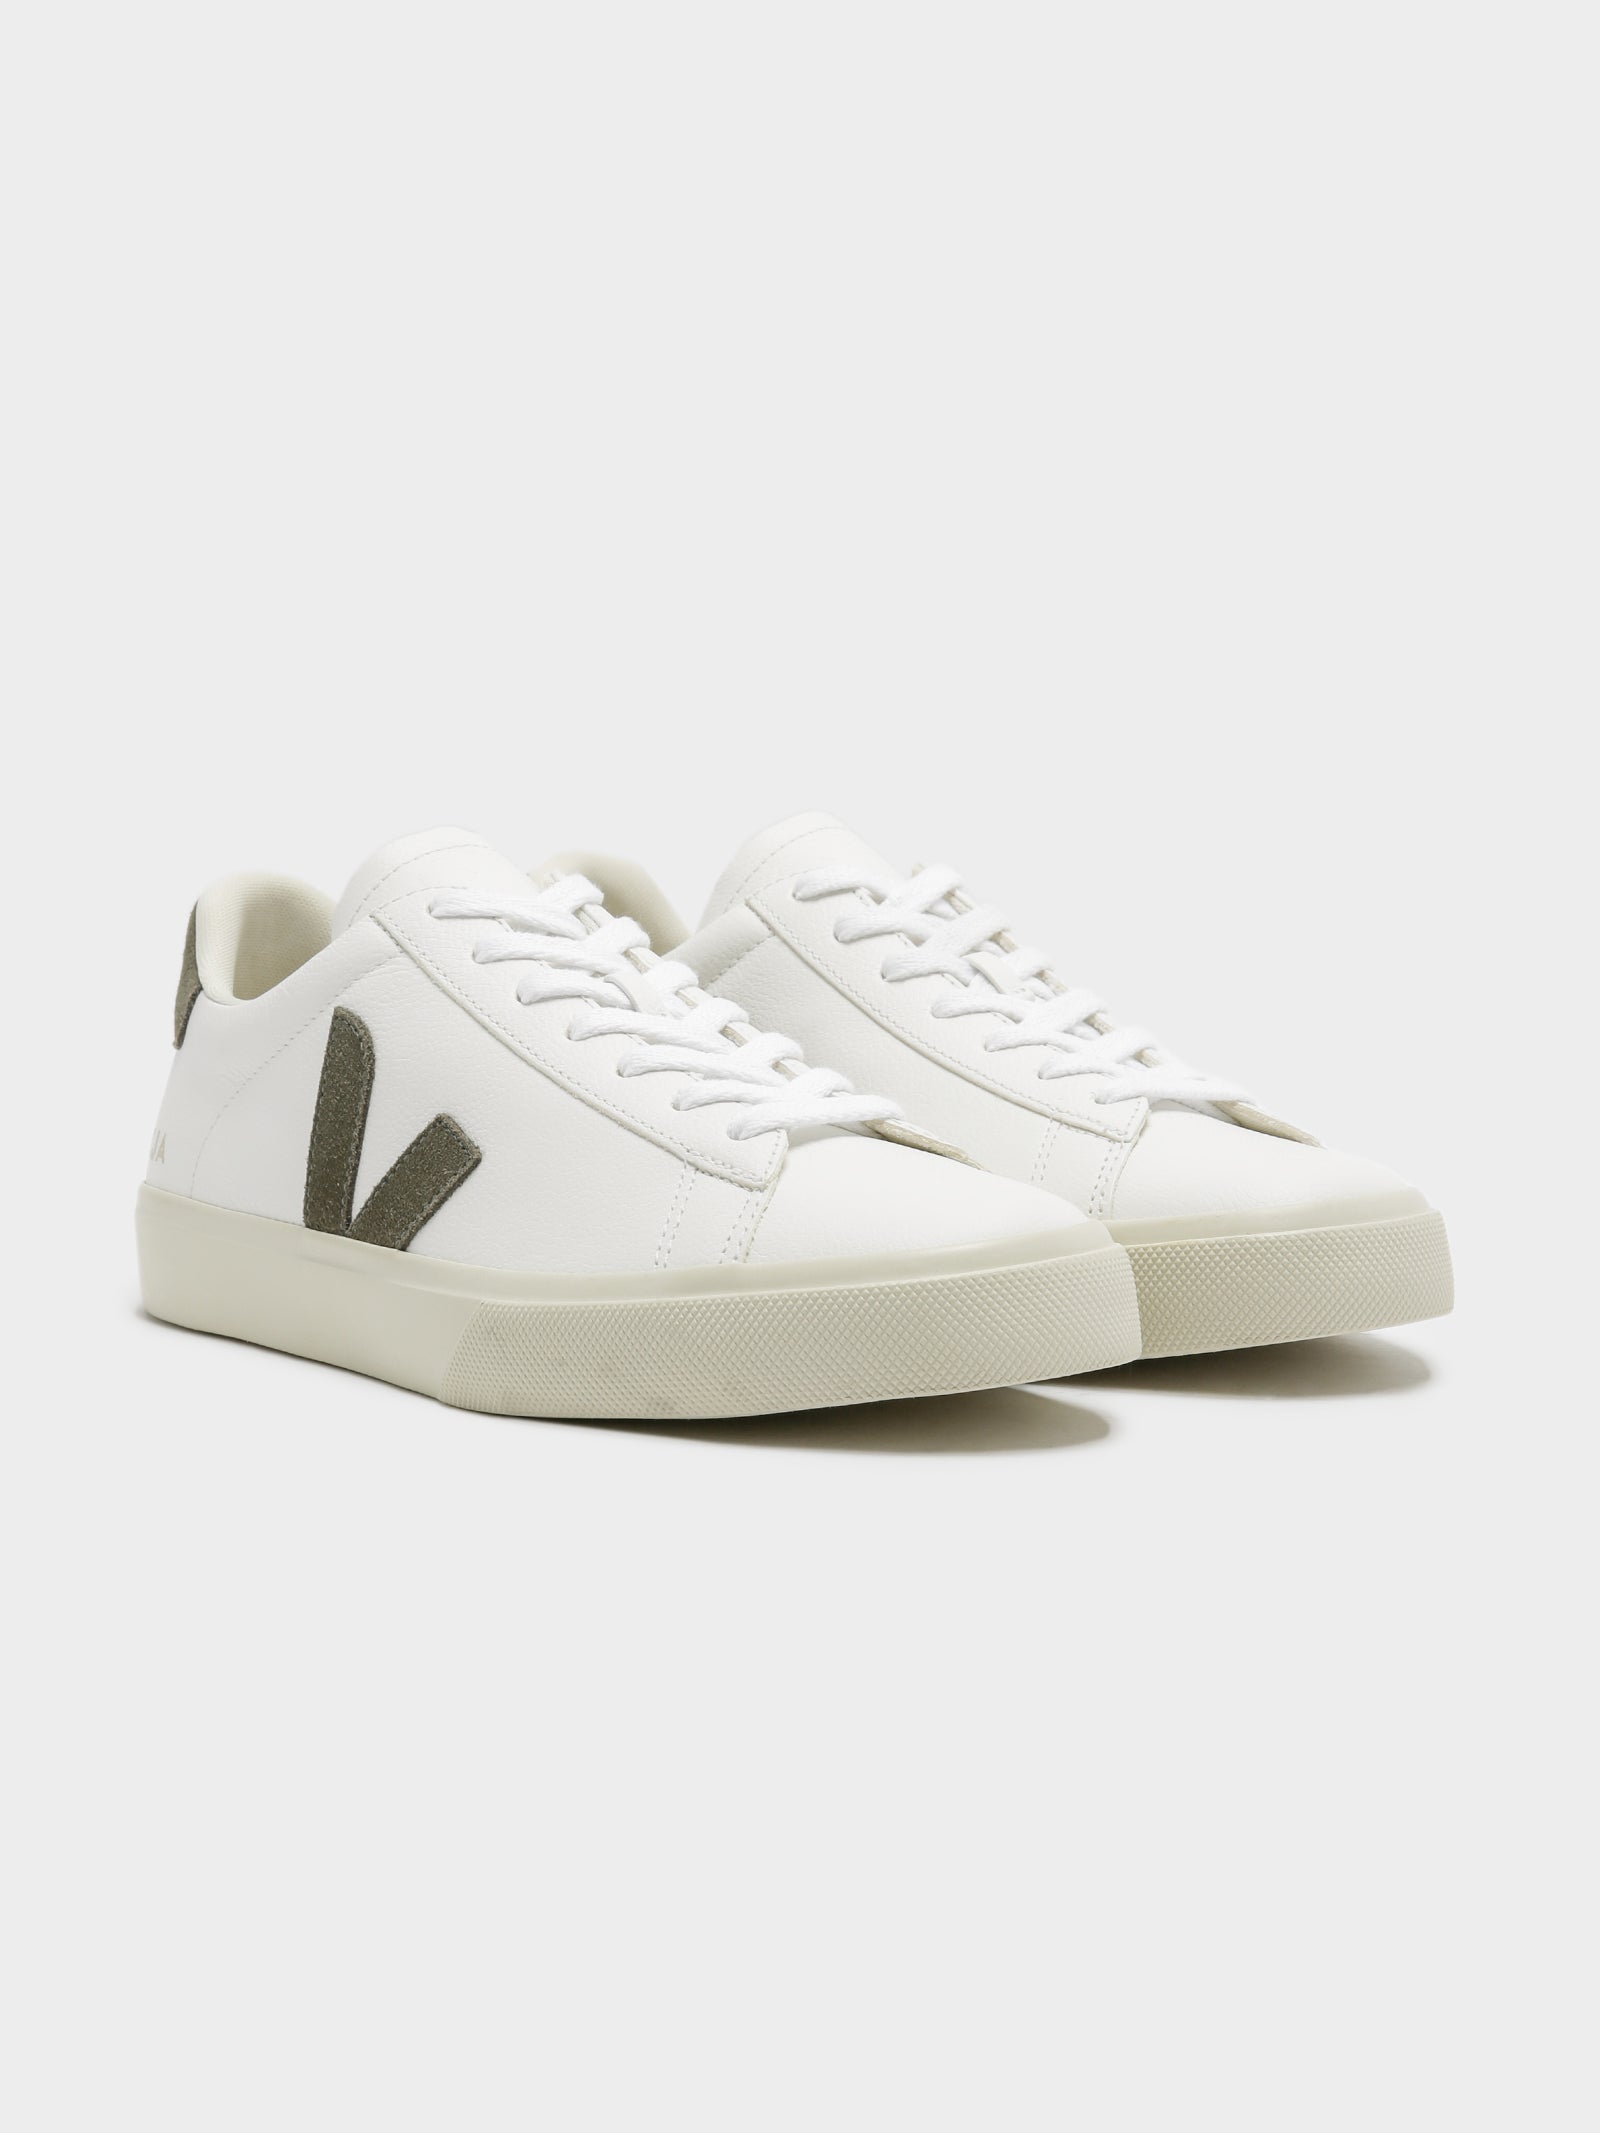 Mens Campo Leather Sneakers in White & Khaki - Glue Store